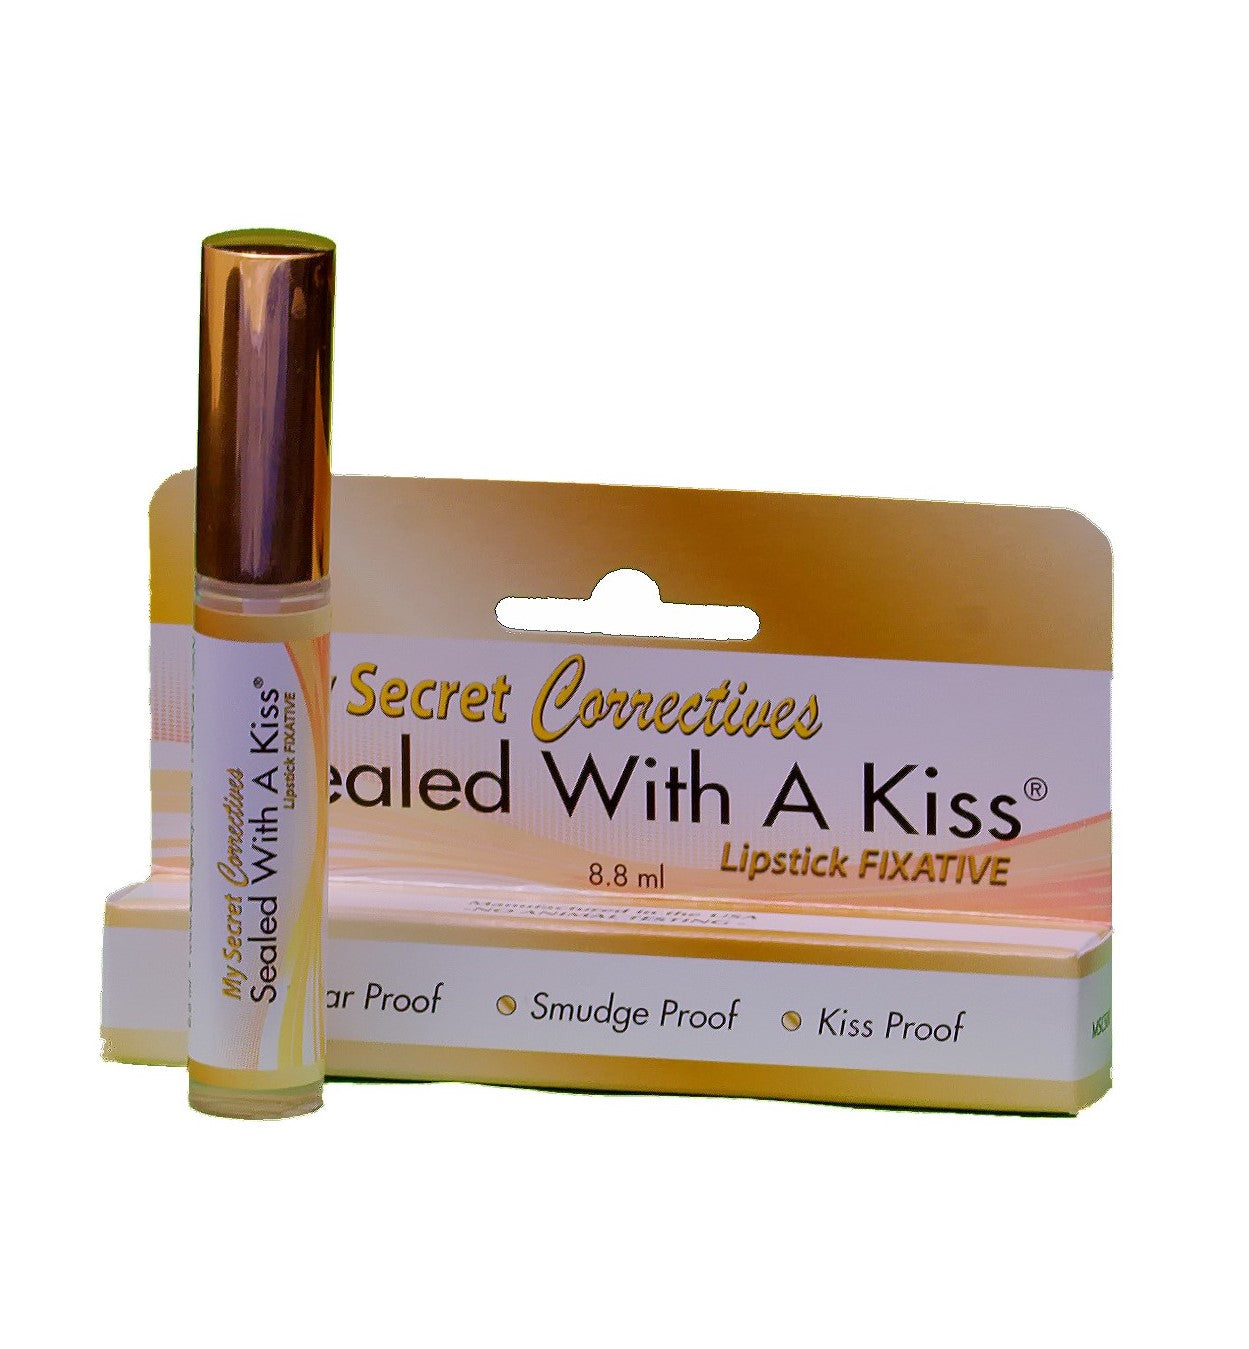 My Secret Correctives Sealed With A Kiss - 8.8ml Wand Applicator